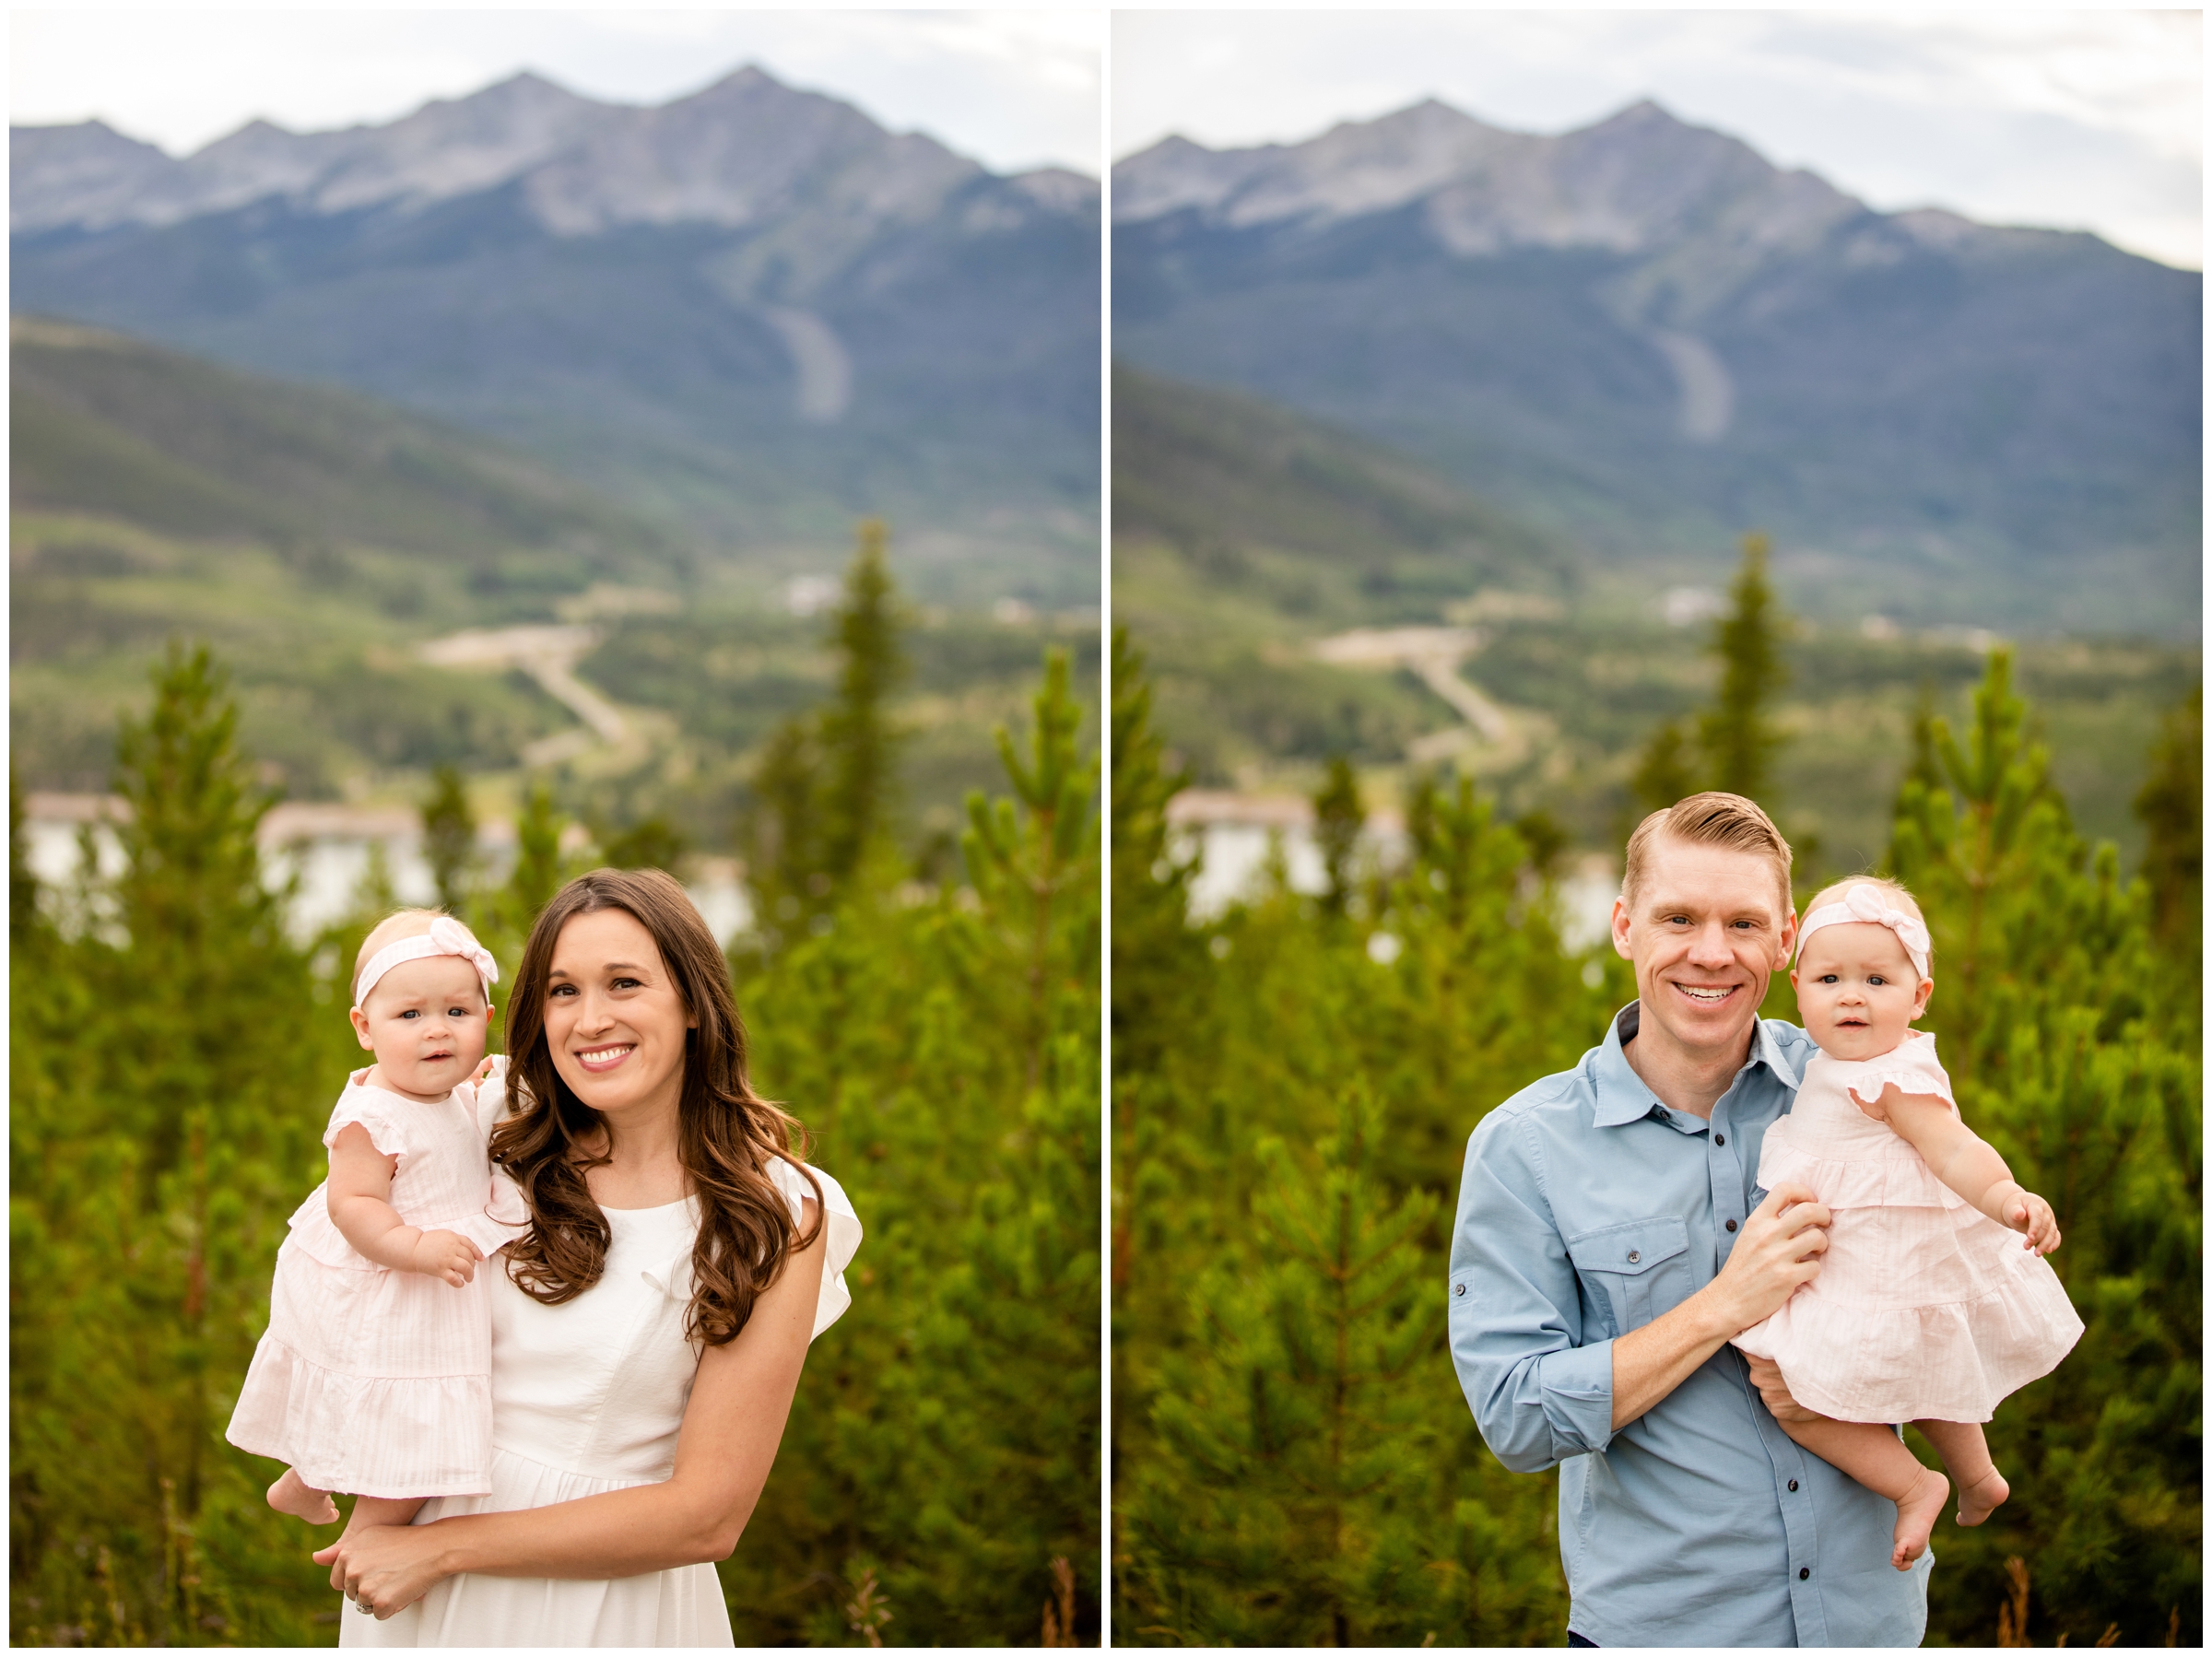 Colorado mountain photography session at Sapphire Point Overlook